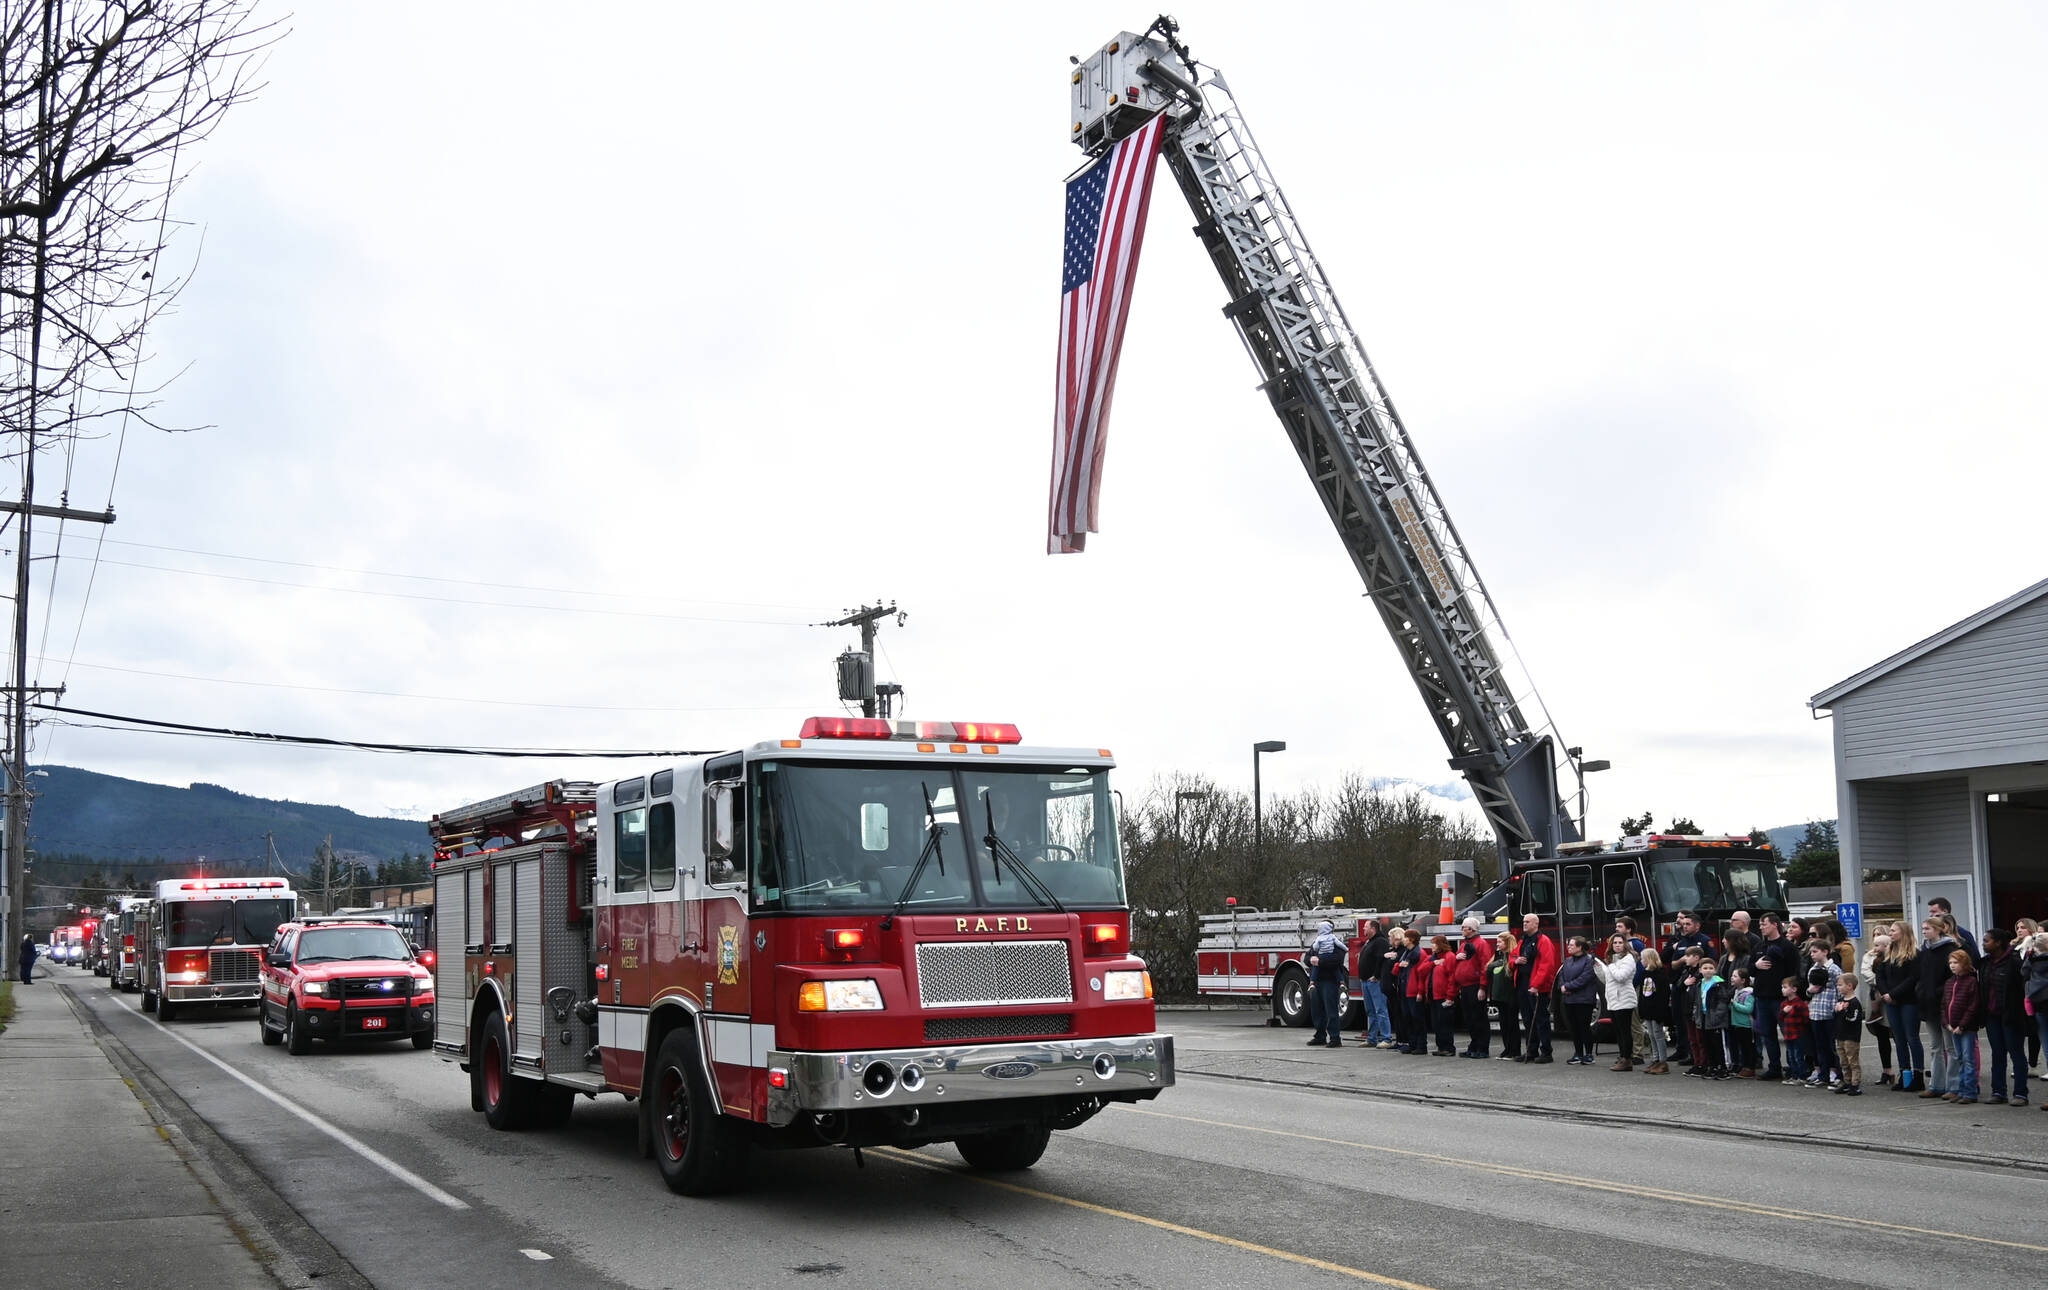 Clallam County Fire District 3 personnel, along with other Olympic Peninsula fire departments, first responders and firends, honor Fire District 3 Capt. Charles “Chad” Cate with a procession of vehicles through Sequim on Jan. 13. Here, the procession passes by District 3’s station on North Fifth Avenue in Sequim. Cate was found deceased in his bunk in the early morning hours of Jan. 12. (Michael Dashiell/Olympic Peninsula News Group)